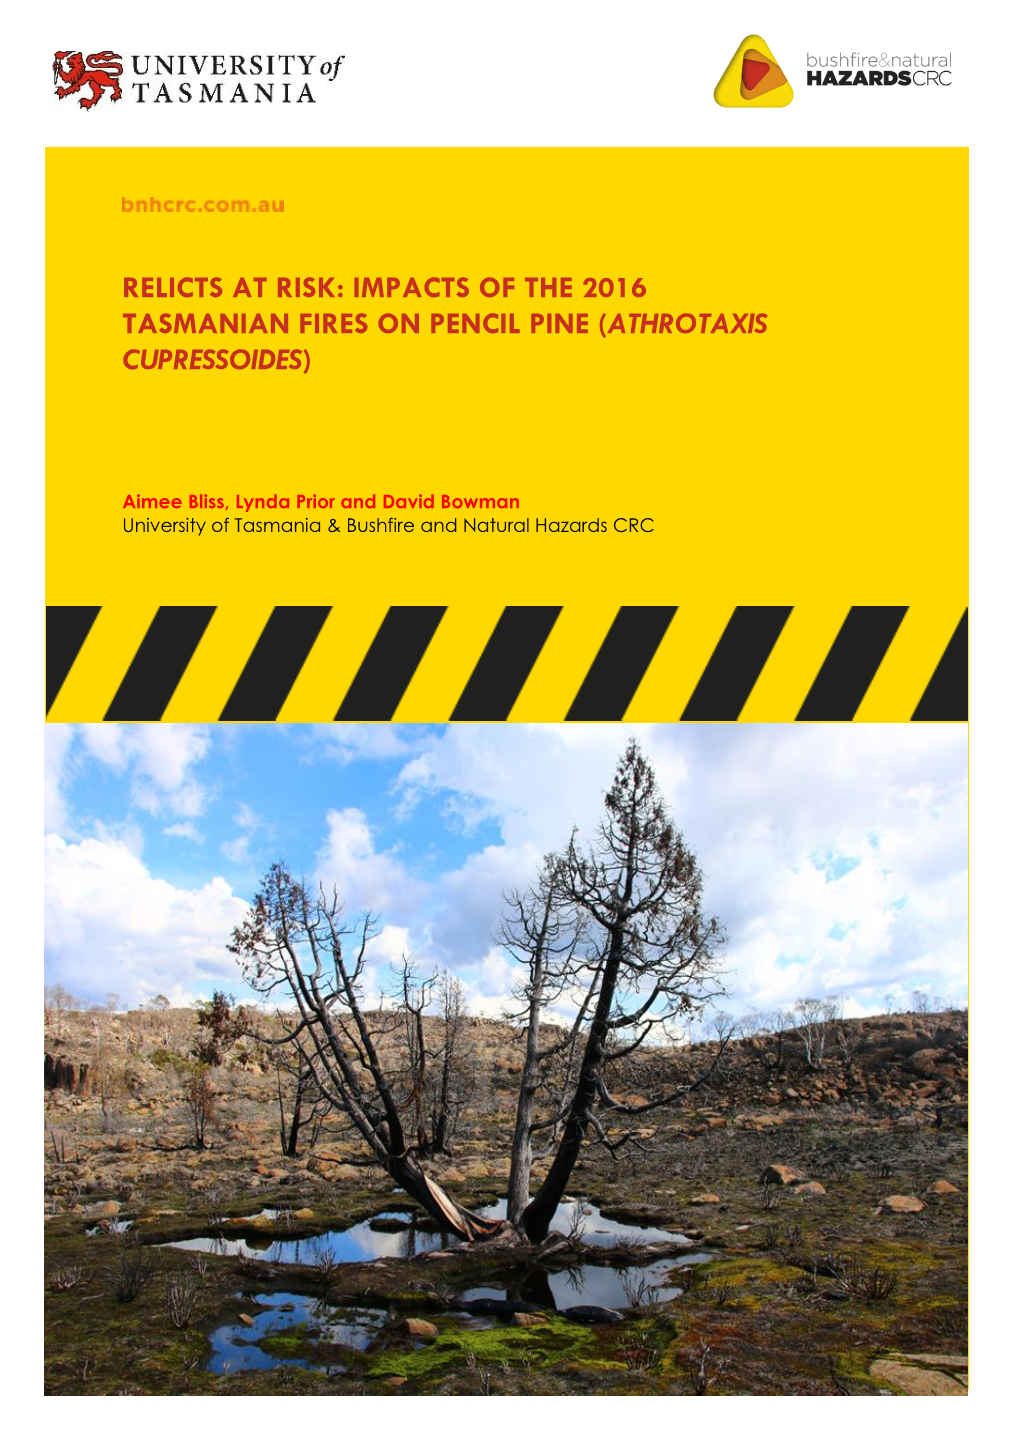 Impacts of the 2016 Tasmanian Fires on Pencil Pine (Athrotaxis Cupressoides)